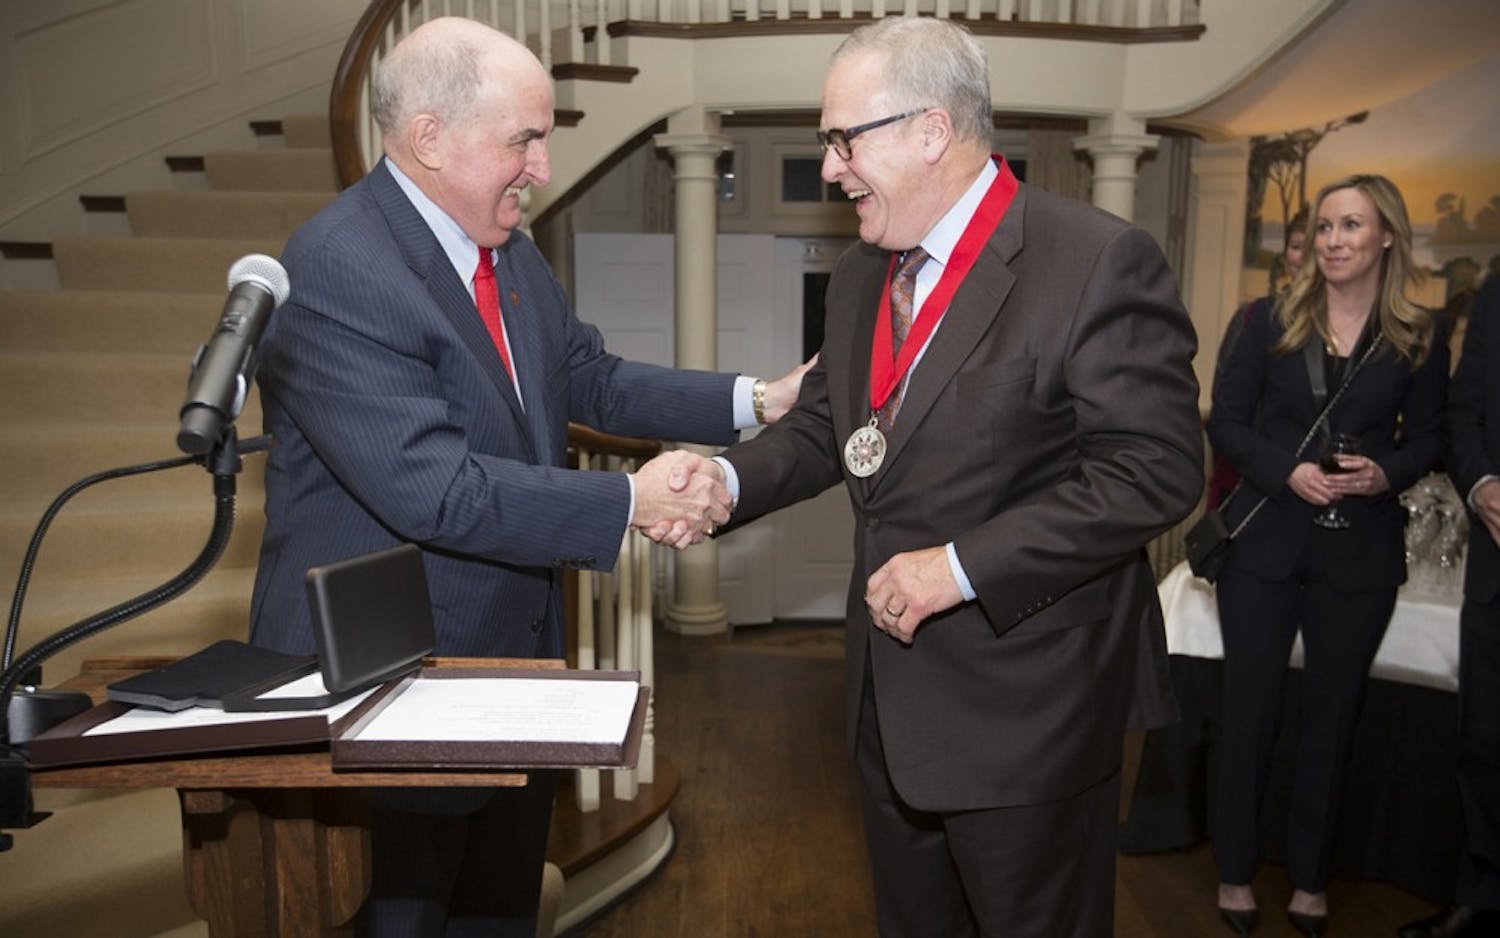 IU President Michael McRobbie awards the President's Medal for Excellence to John Lechleiter. The award is the highest honor an IU president can award and is given to recognize exceptional distinction in public service.
